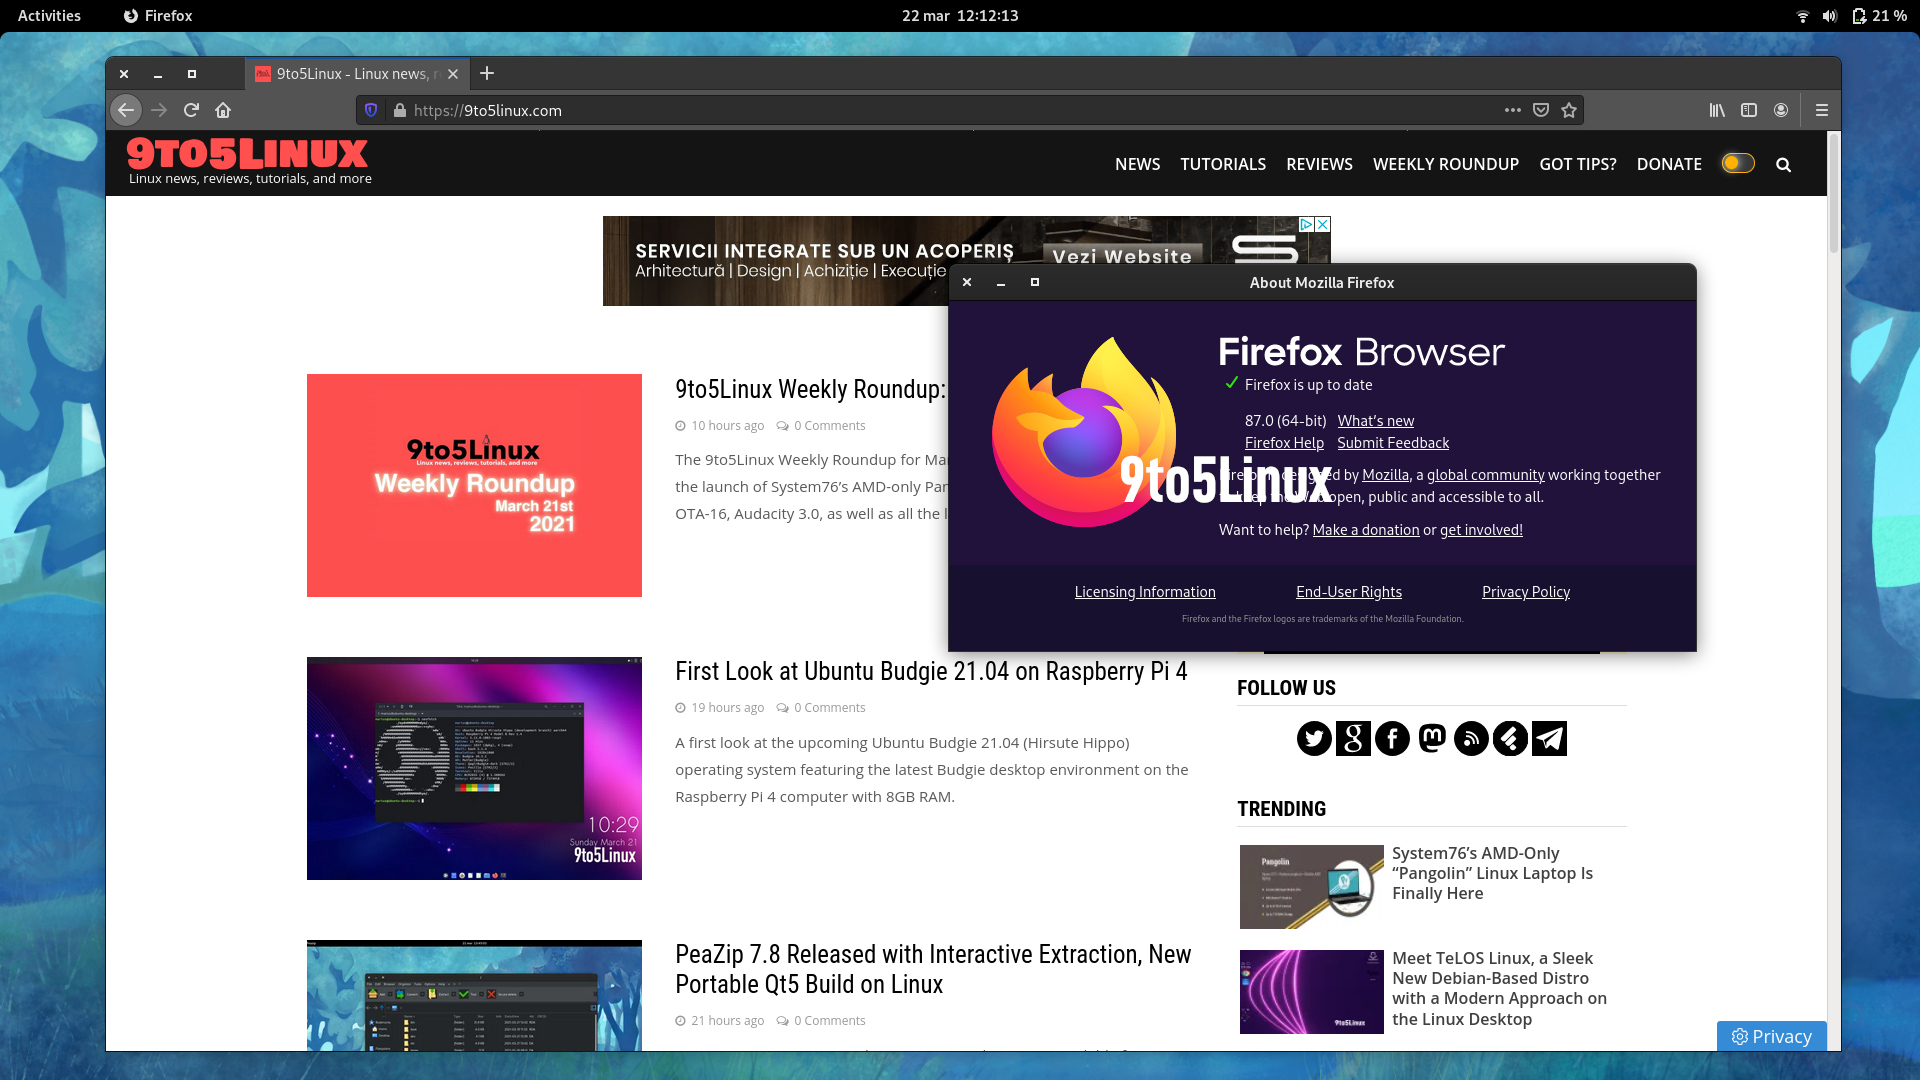 Mozilla Firefox 87 Is Now Available for Download, Here’s What’s New